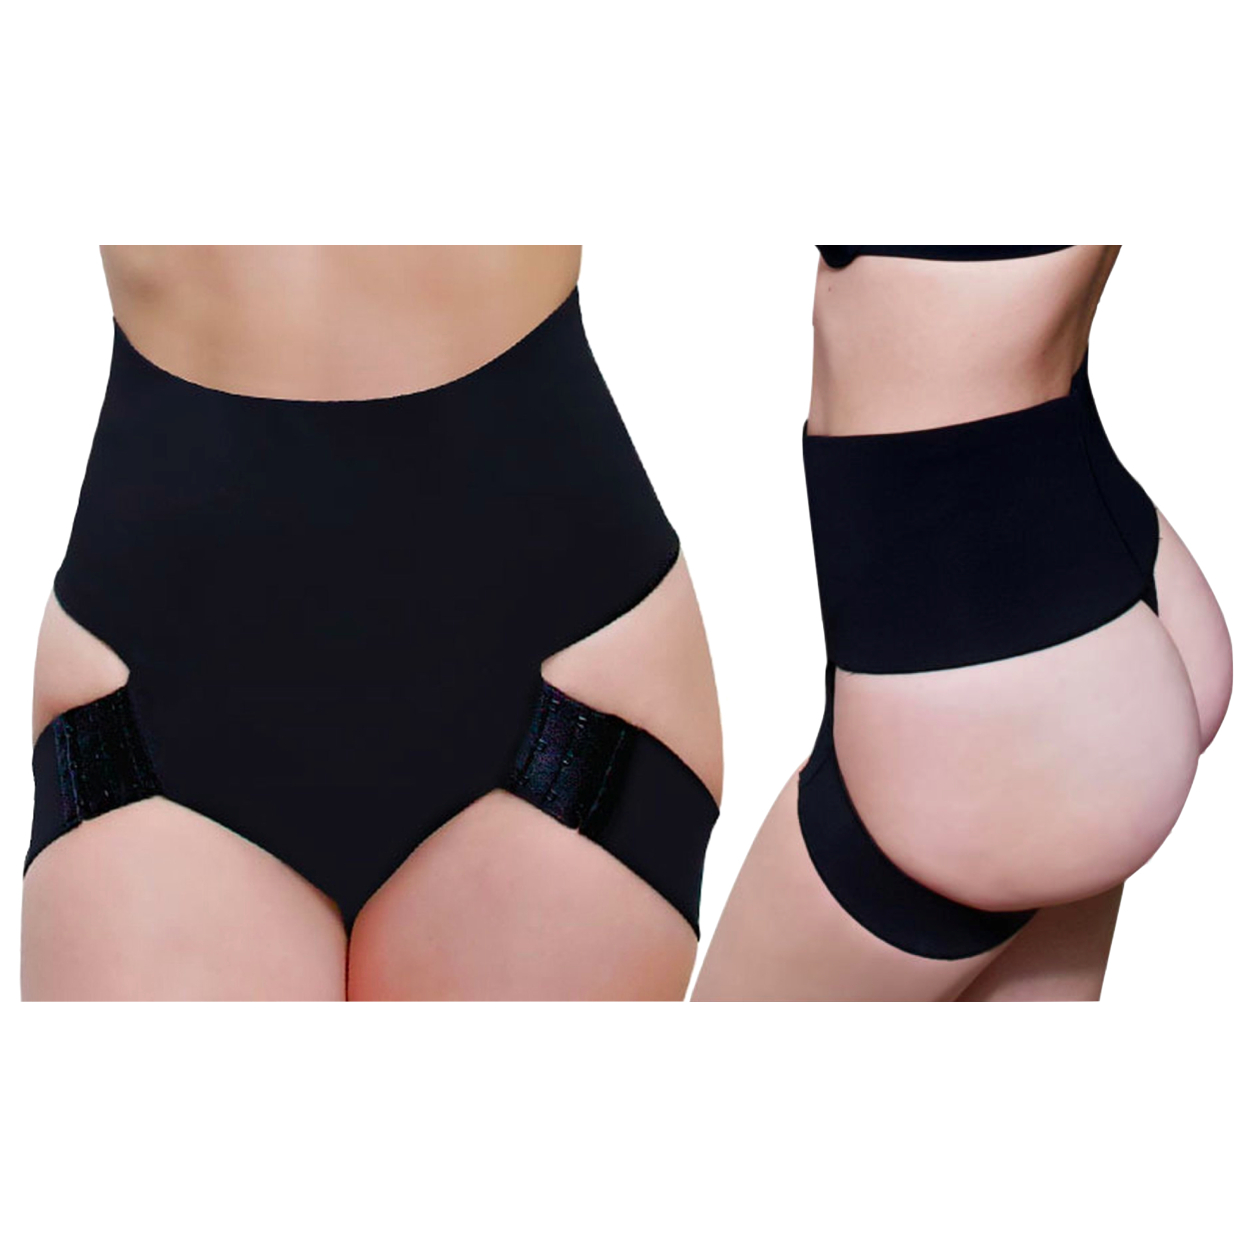 Adjustable Butt Booster Control Shaper In Regular And Plus Sizes - Black, S